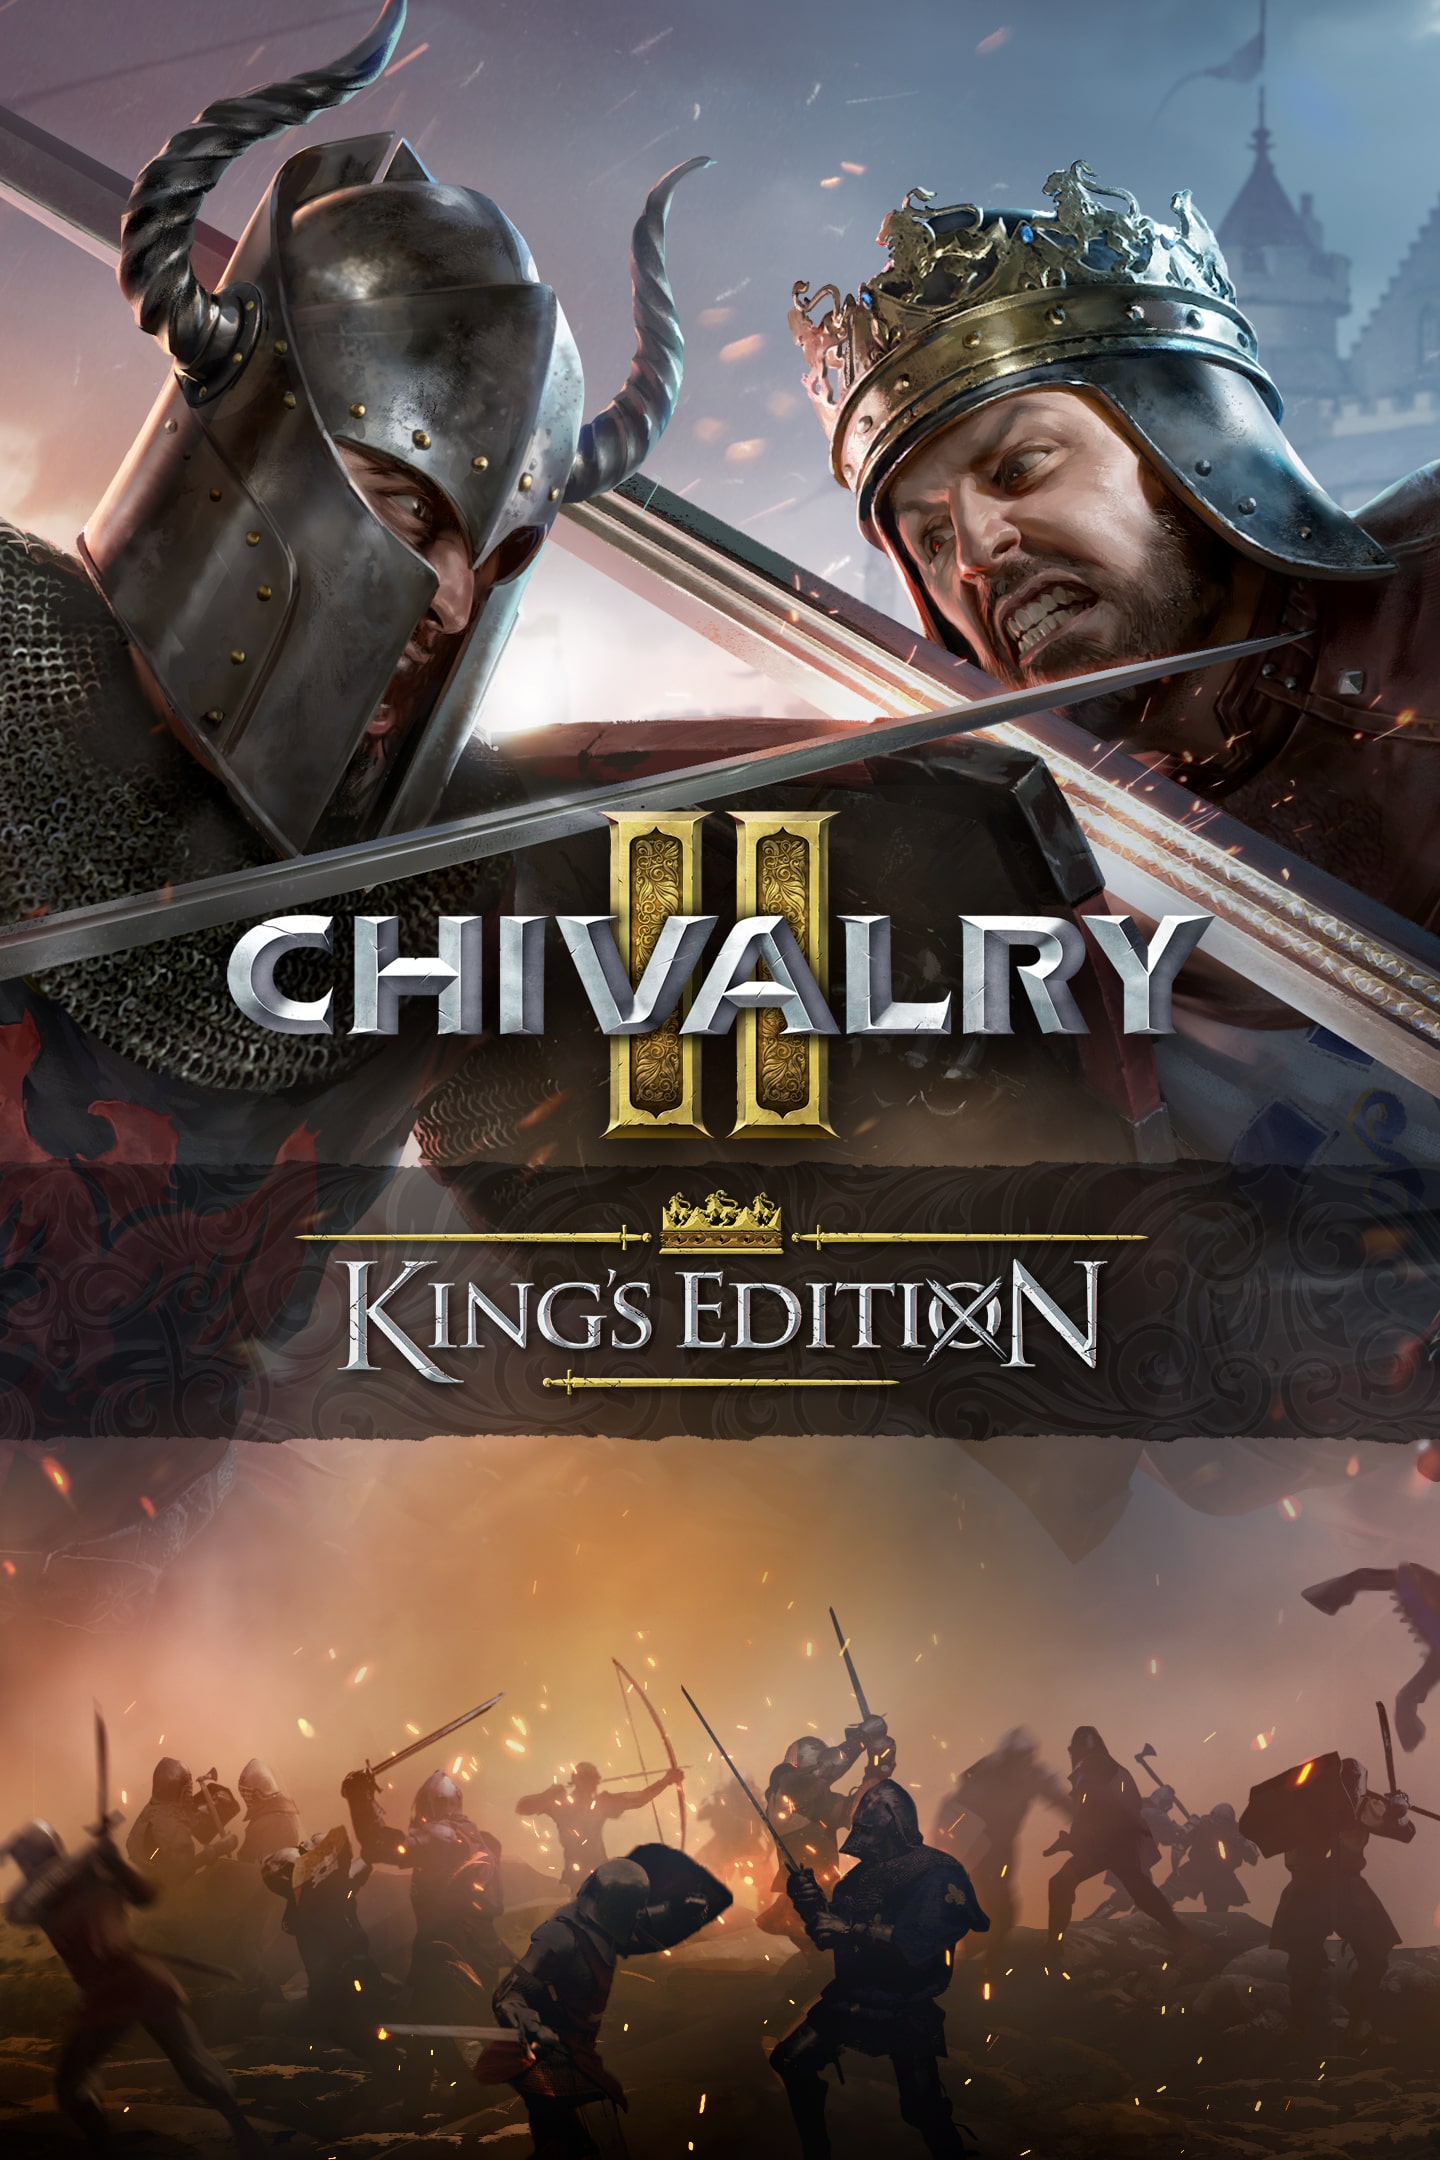 Poupa 60% em Chivalry 2 - King's Edition Content no Steam